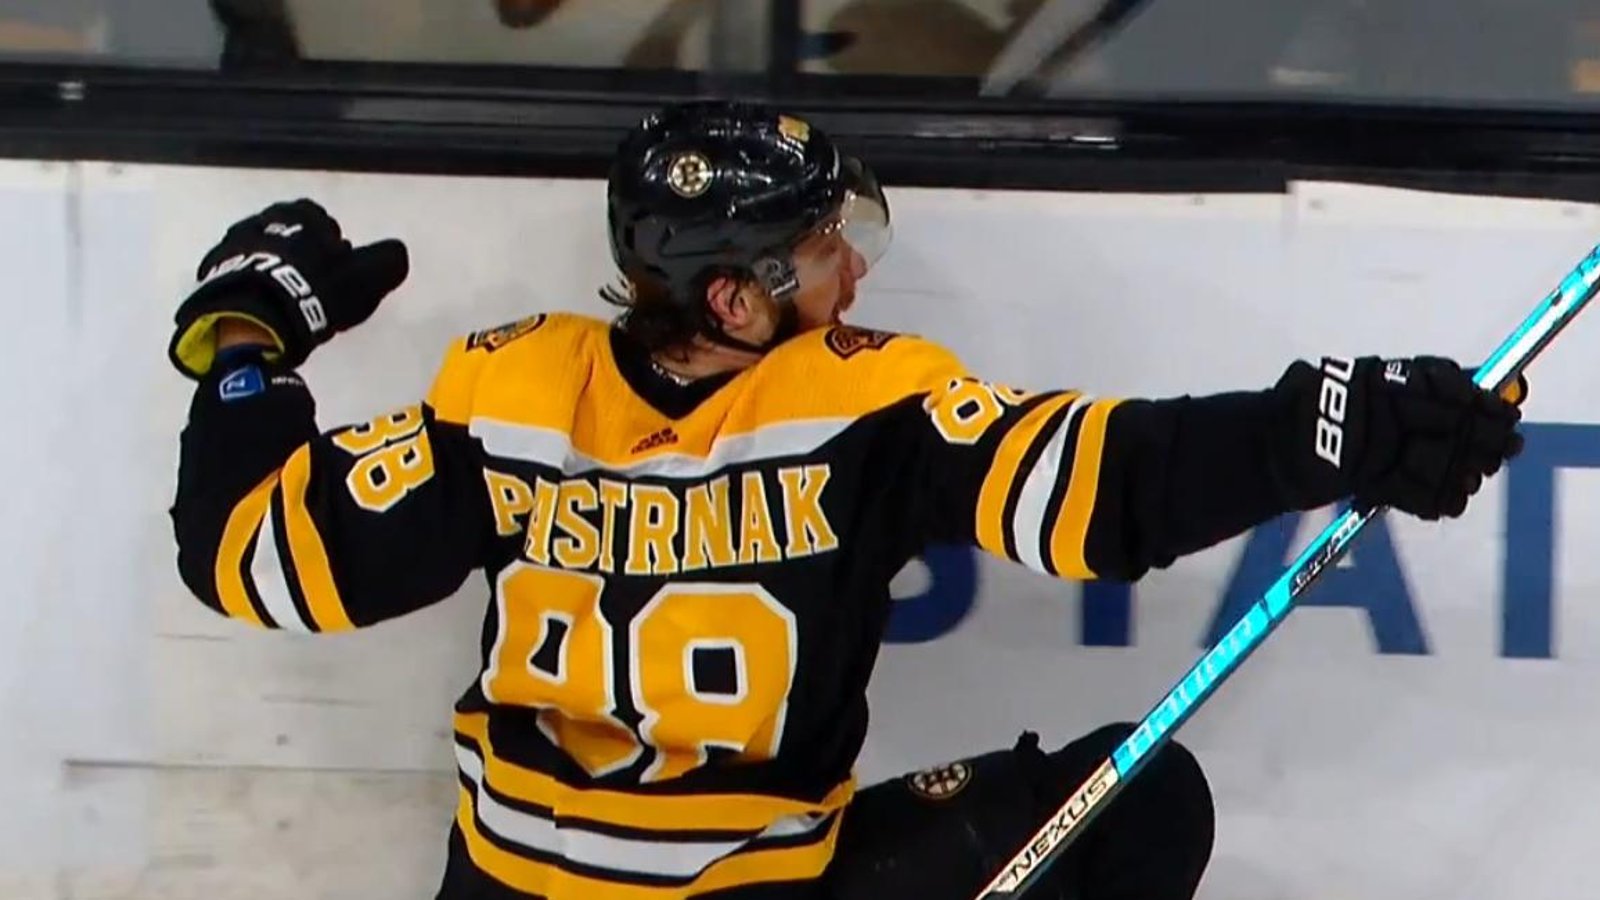 David Pastrnak opens the second round with a hat trick against the Islanders.